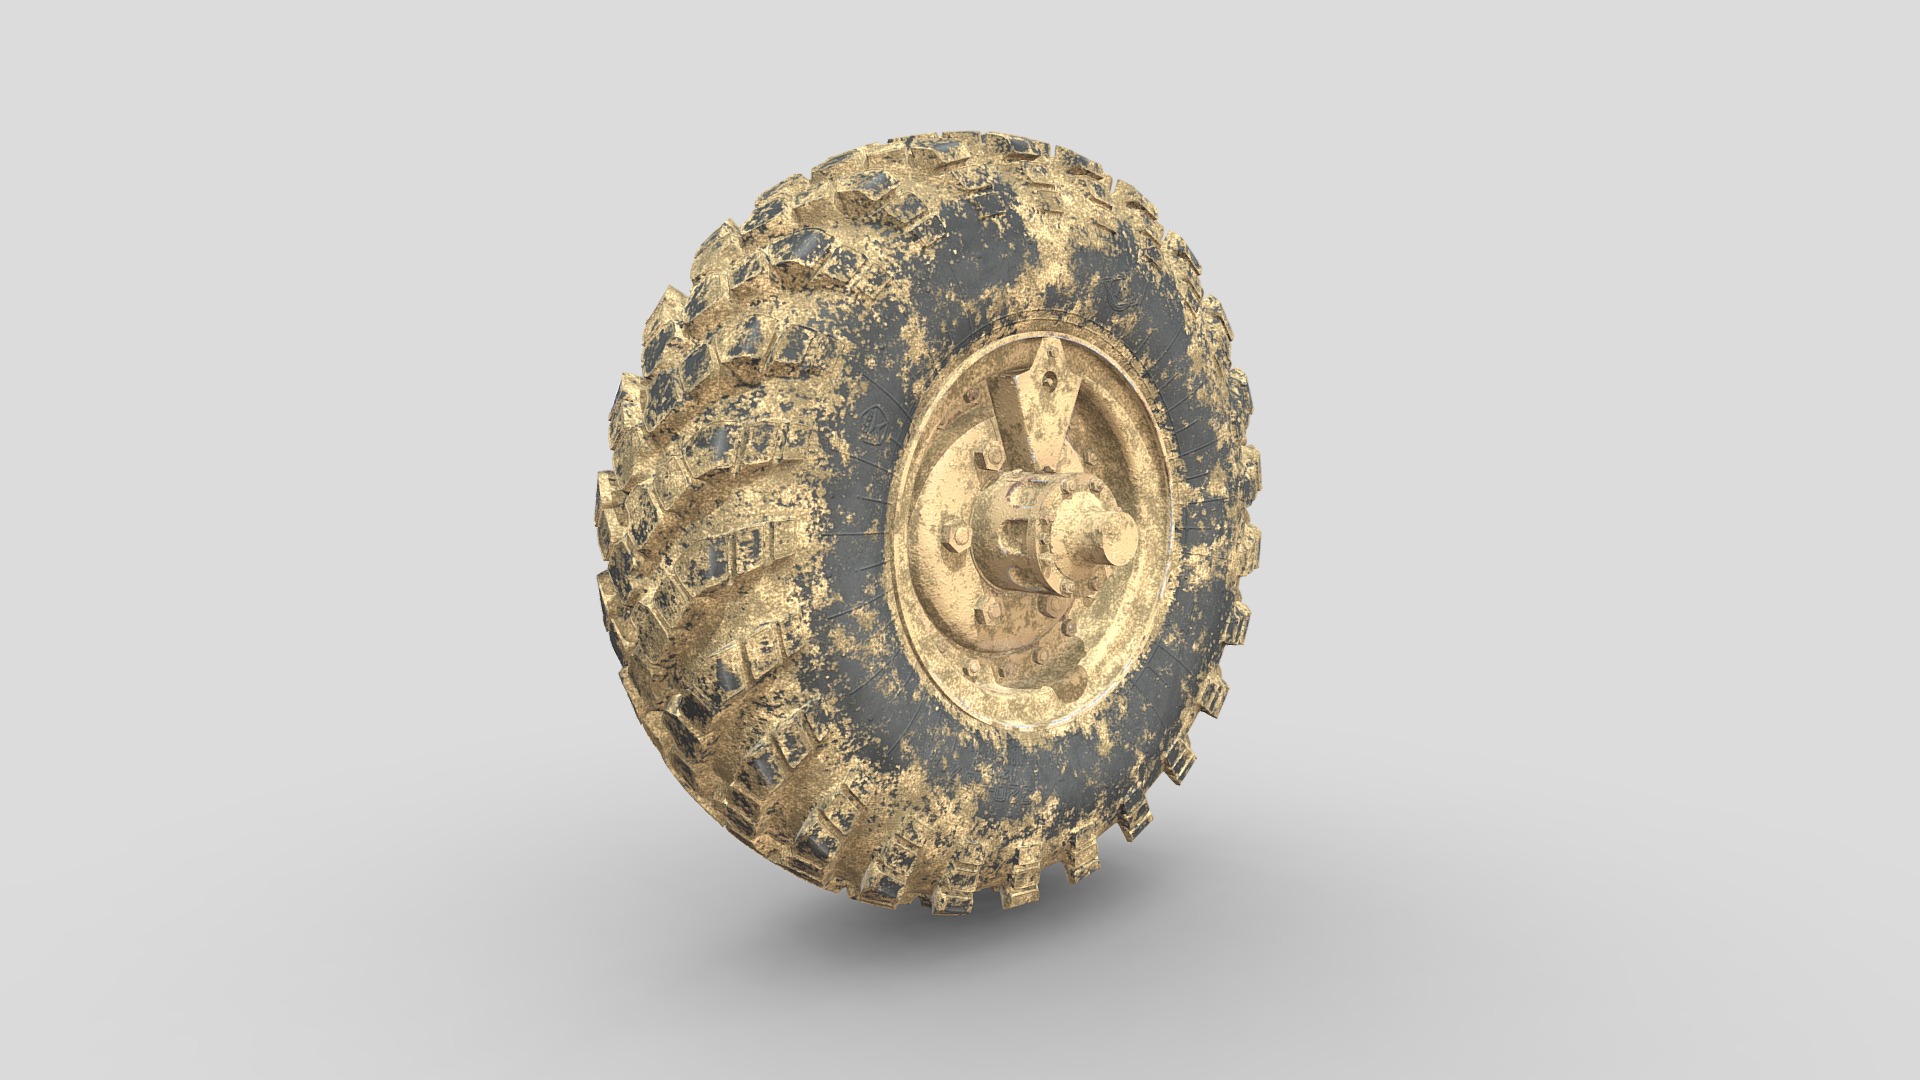 3D model ZIL-157_Tire+Disc_very dirty - This is a 3D model of the ZIL-157_Tire+Disc_very dirty. The 3D model is about a coin with a design on it.